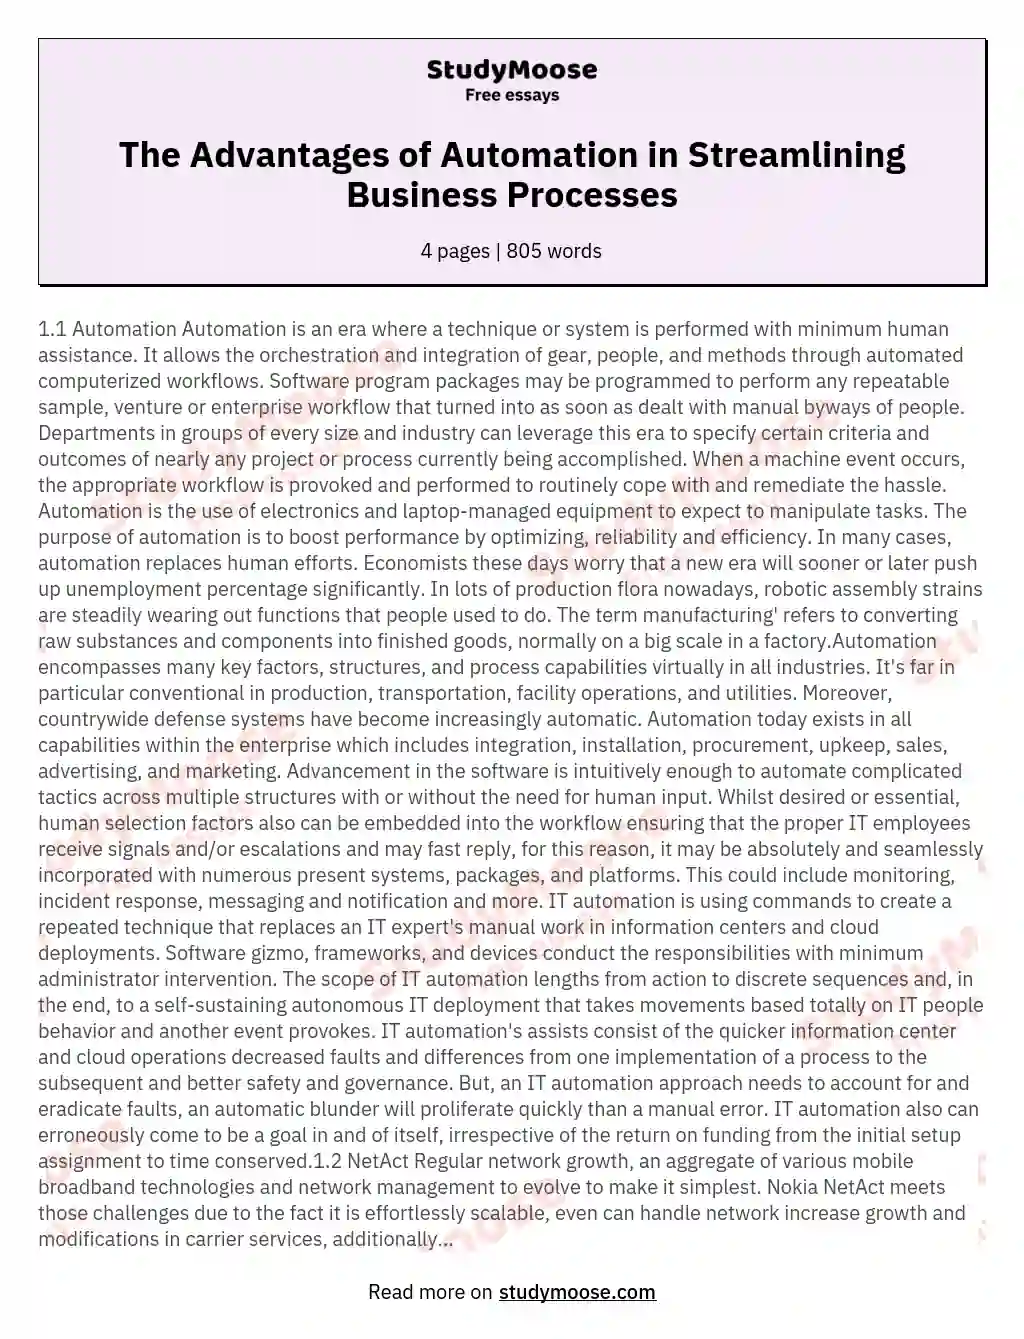 The Advantages of Automation in Streamlining Business Processes essay